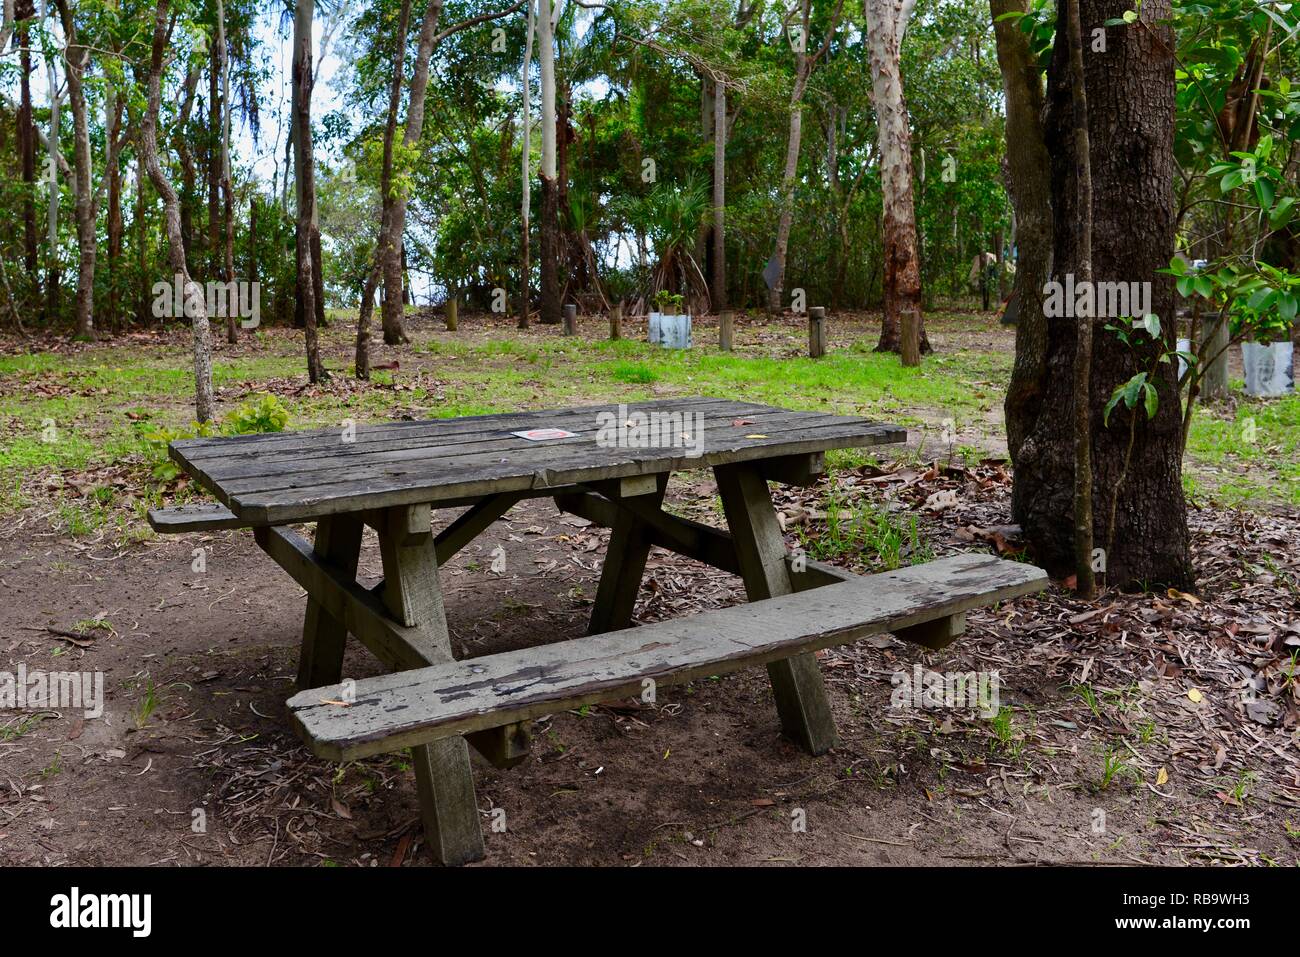 Scenes from the Smalleys Beach Camp Ground, Cape Hillsborough National Park, Qld, Australia Stock Photo